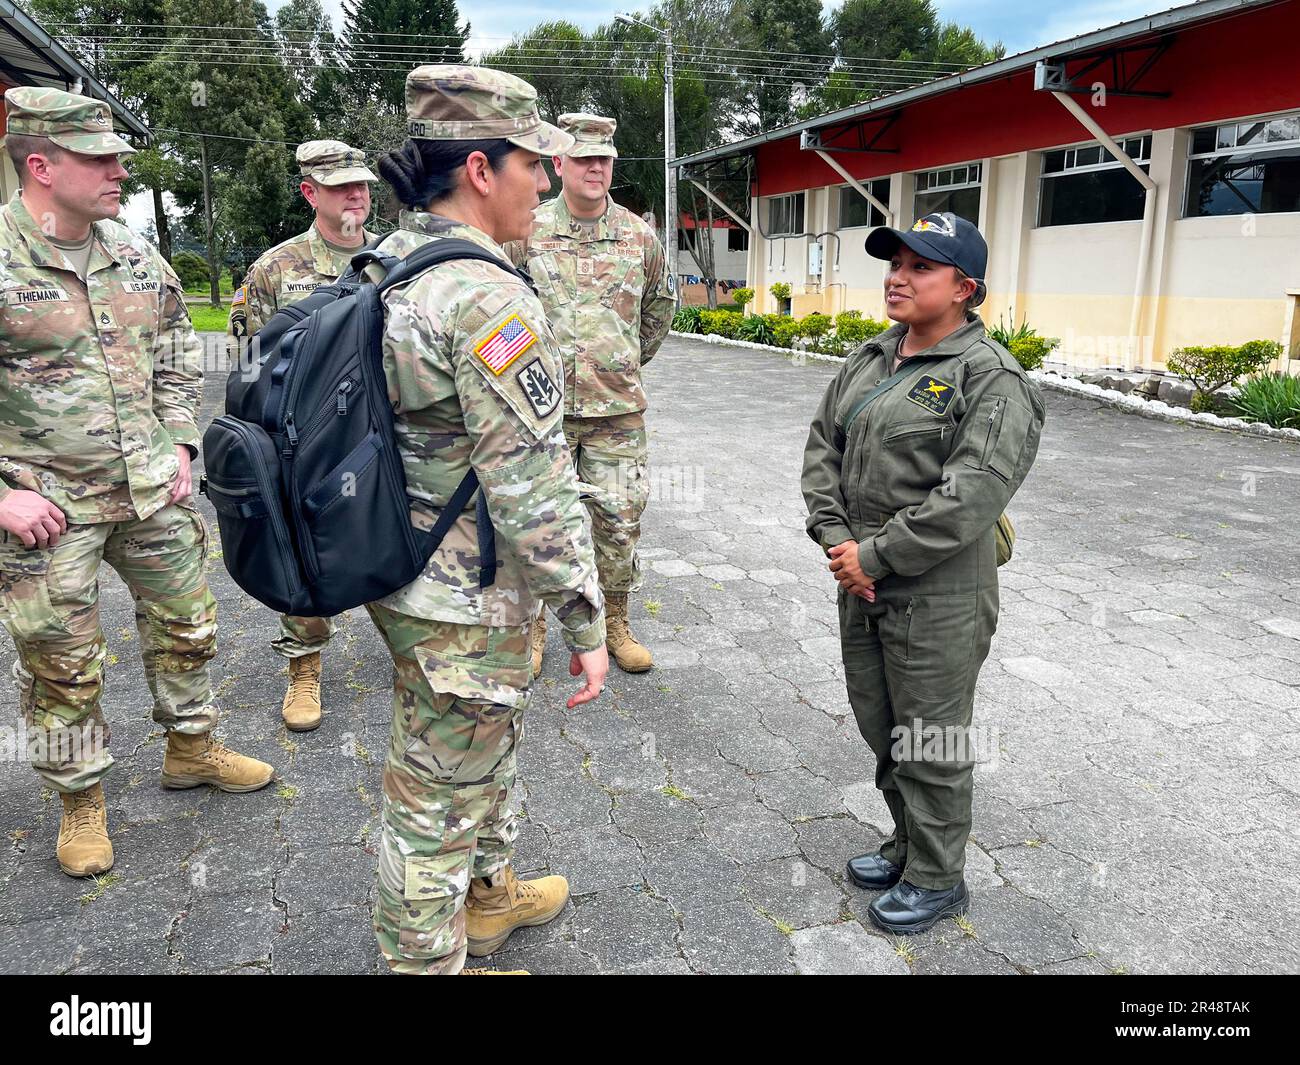 Members of the Kentucky National Guard tour the Brigada de Aviacion del Ejercito Nro. 15 'Paquisha' with members of the Ecuadorian Armed Forces during the Senior Enlisted Seminar March 22, 2023 in Quito, Ecuador. During the seminar, the participants exchanged best-practices on topics involving non-commisioned officer competencies, capabilities and leadership responsibilities. (Submitted photos) Stock Photo